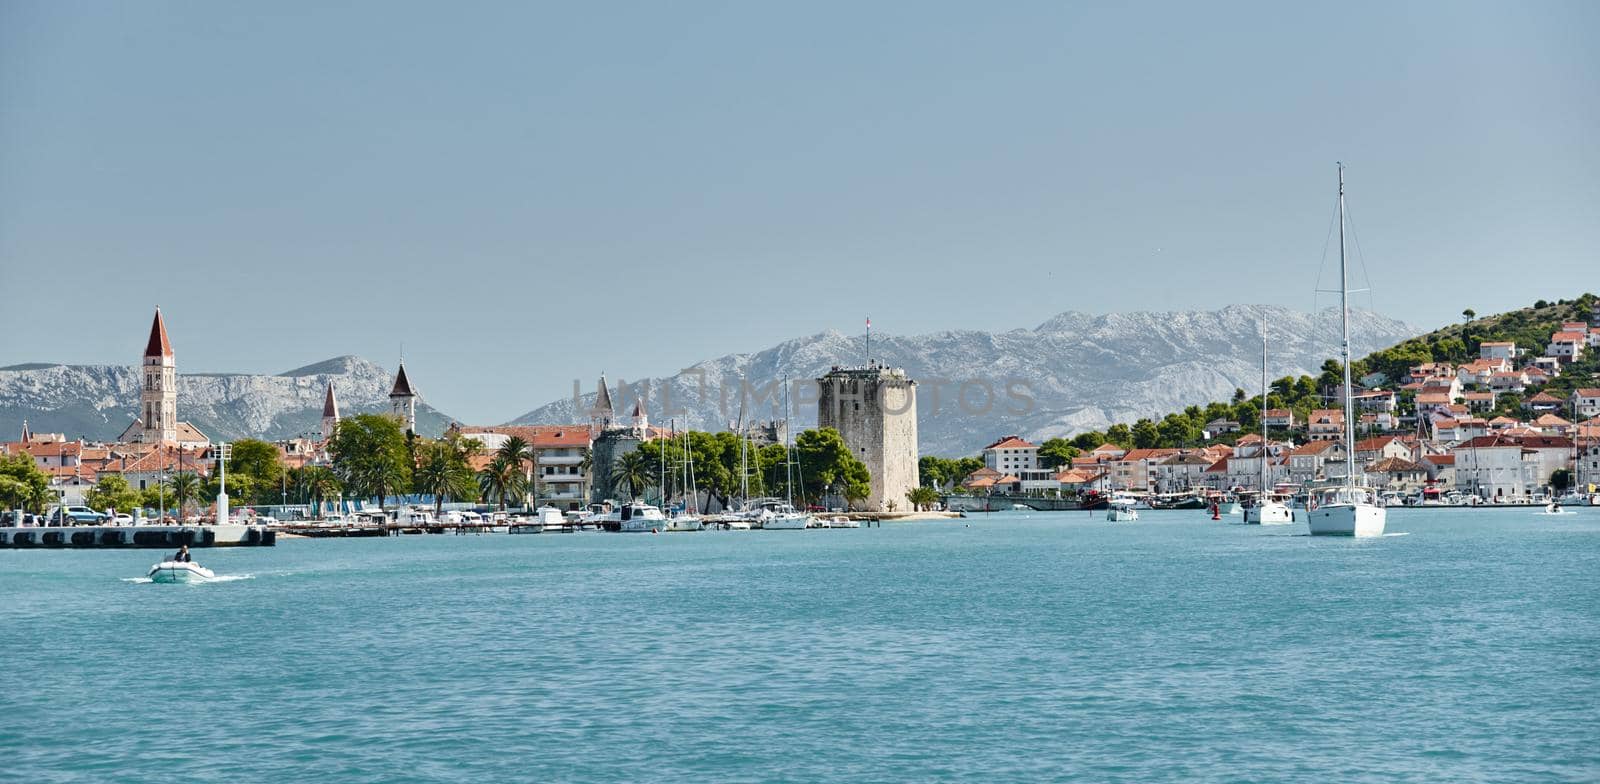 Seaview of Trogir, Croatia, cityscape from level of water, tower, boats and yachts